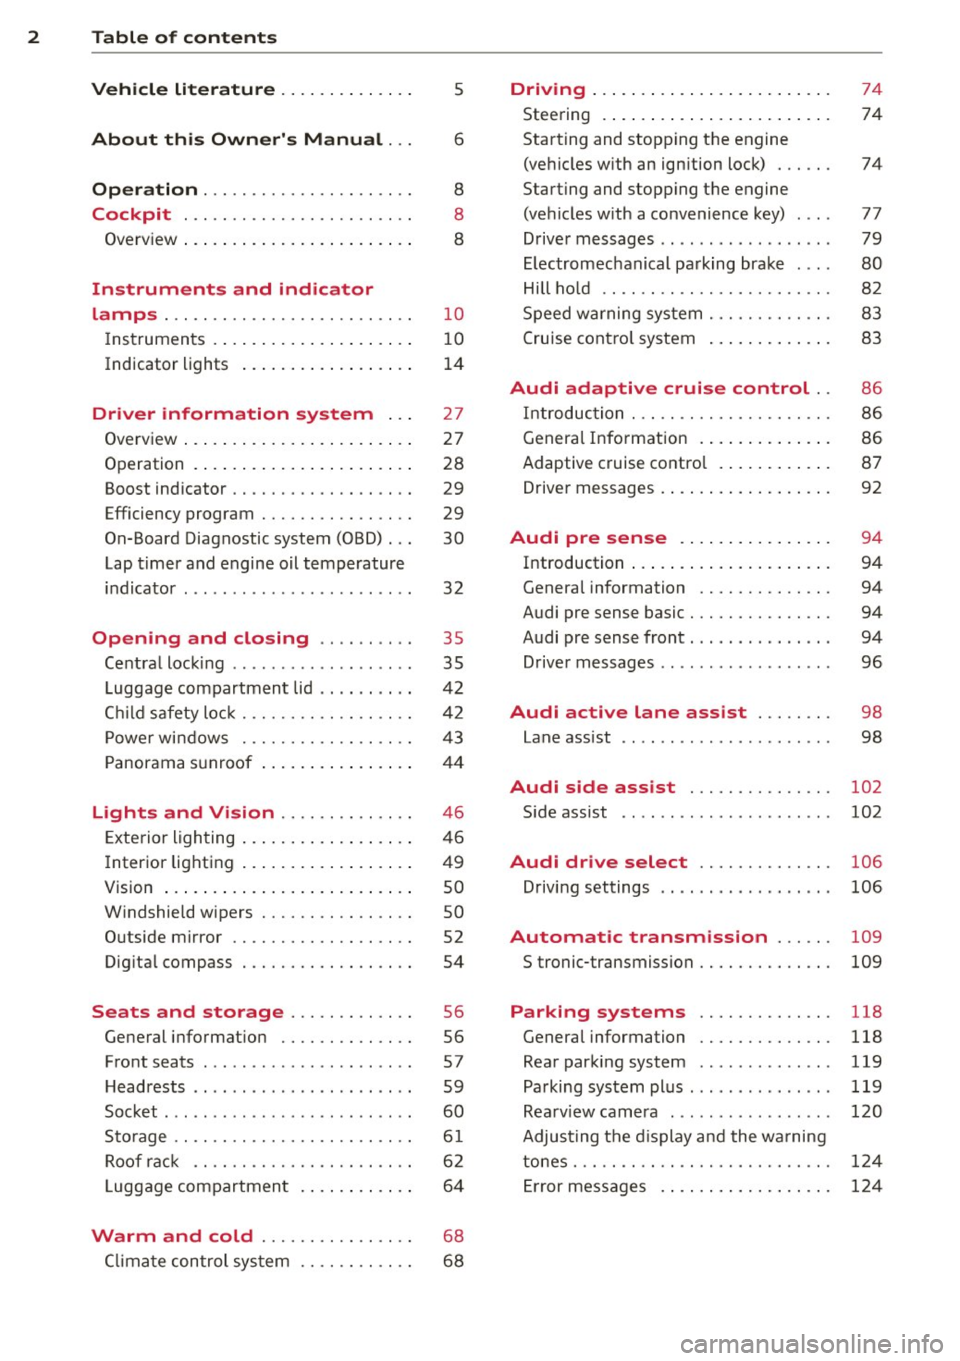 AUDI S3 2015  Owners Manual 2  Table  of  contents Vehicle  literature  .. .. .. .. .. ... . 
About  this  Owners  Manual  ... 
Operation  .............. .... ...  . 
Cockpit  ... ............. .... .. . . 
Ove rv iew  ... ... 